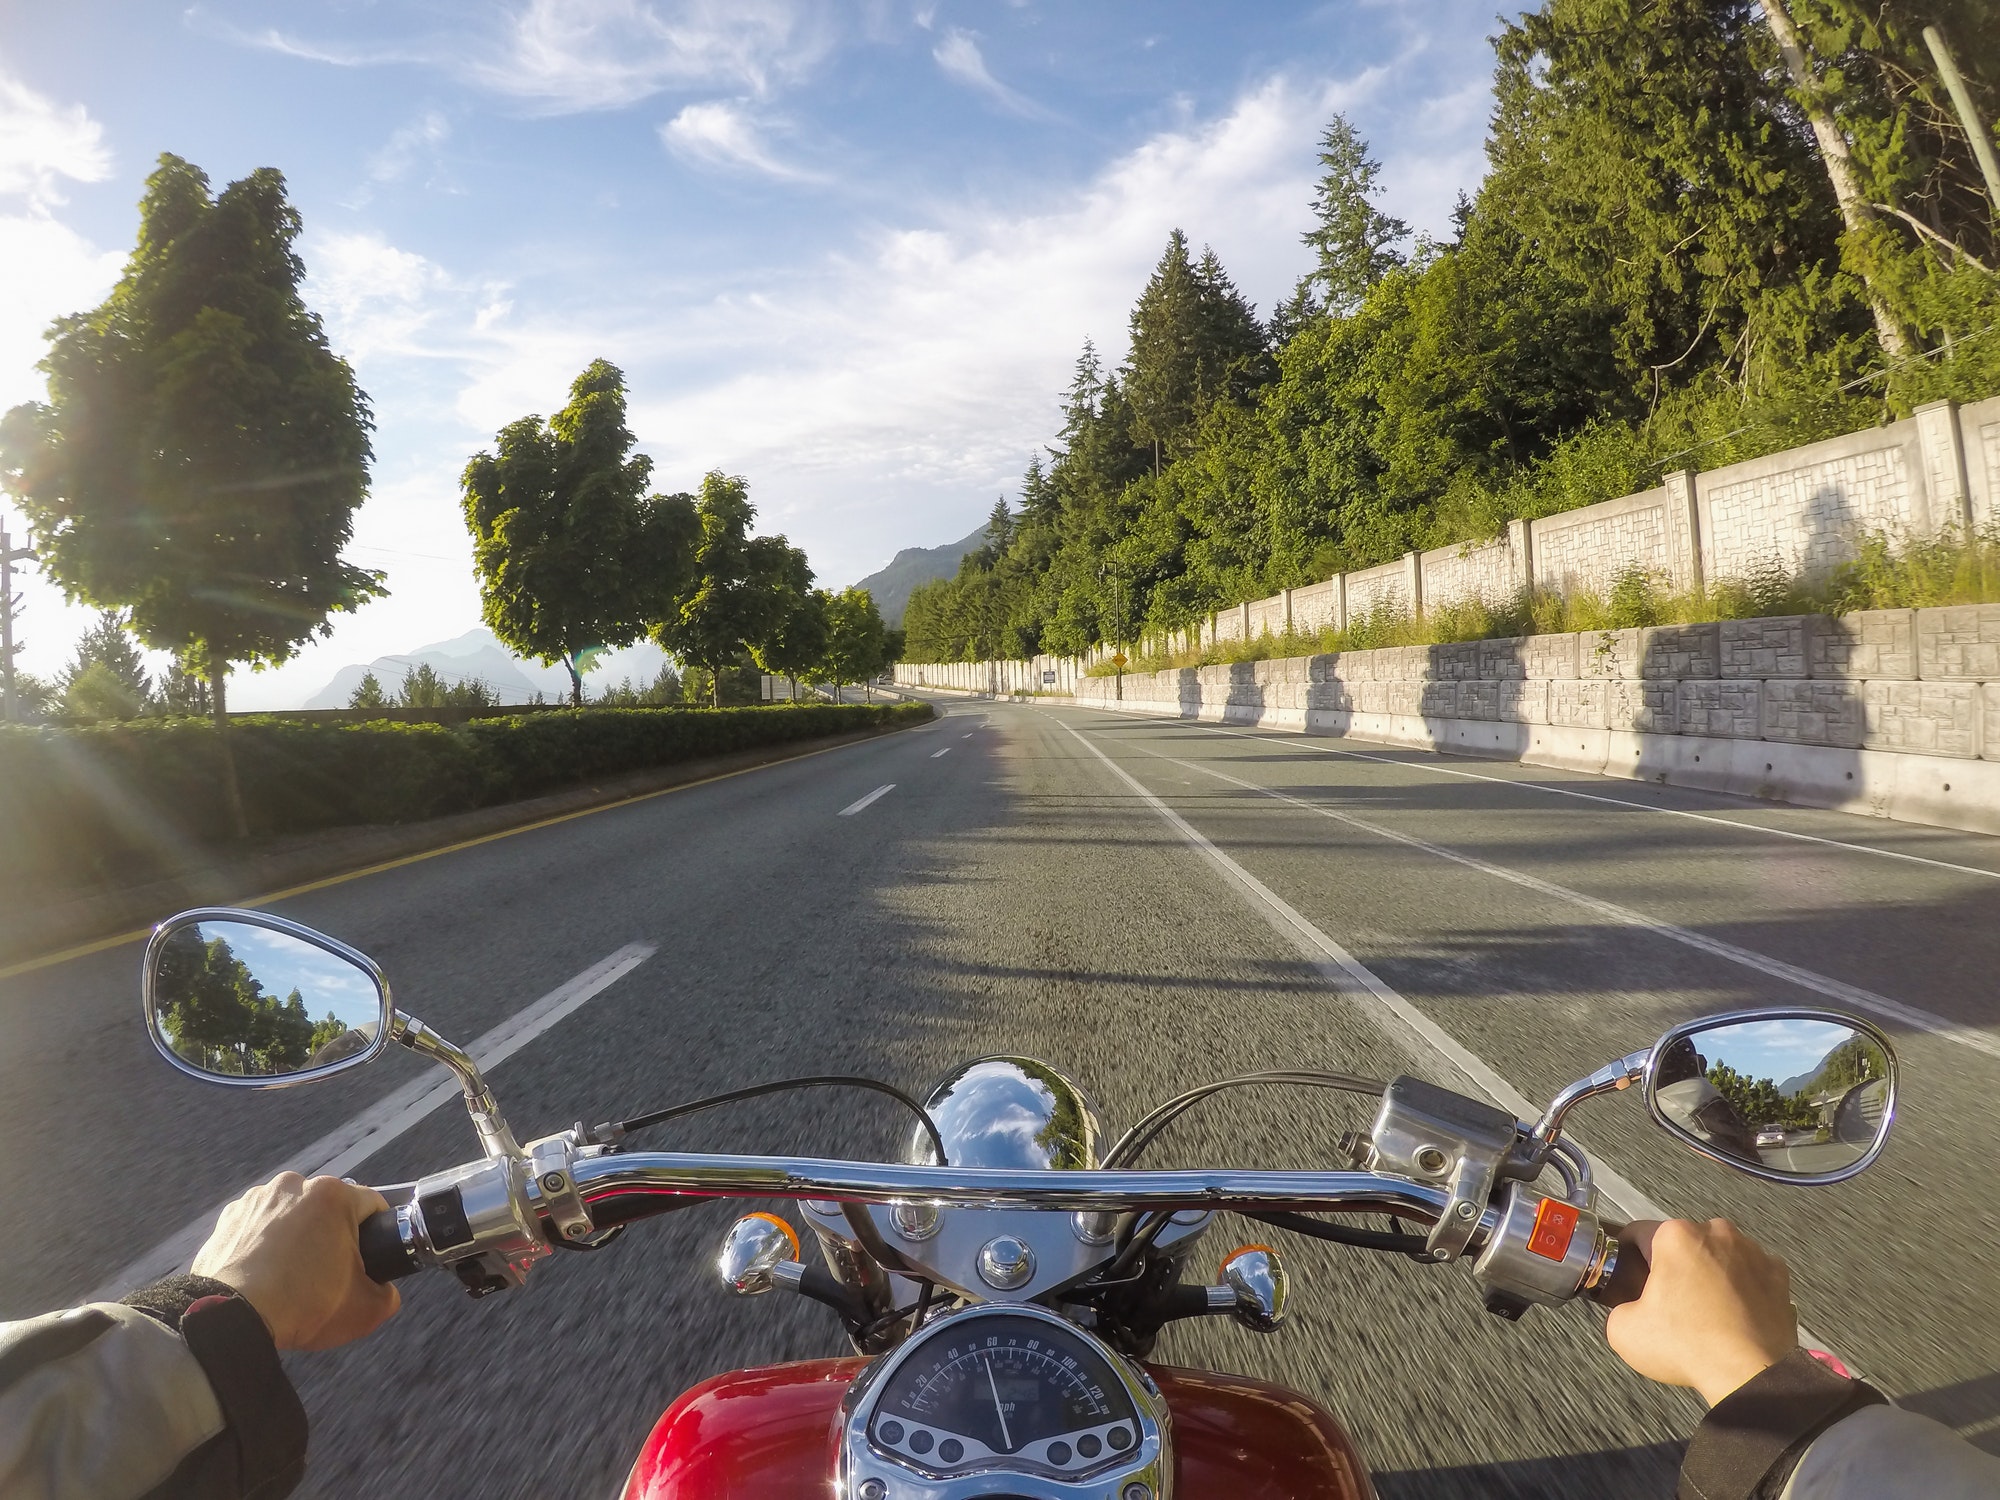 Riding a cruiser motorcycle on Sea to Sky Highway